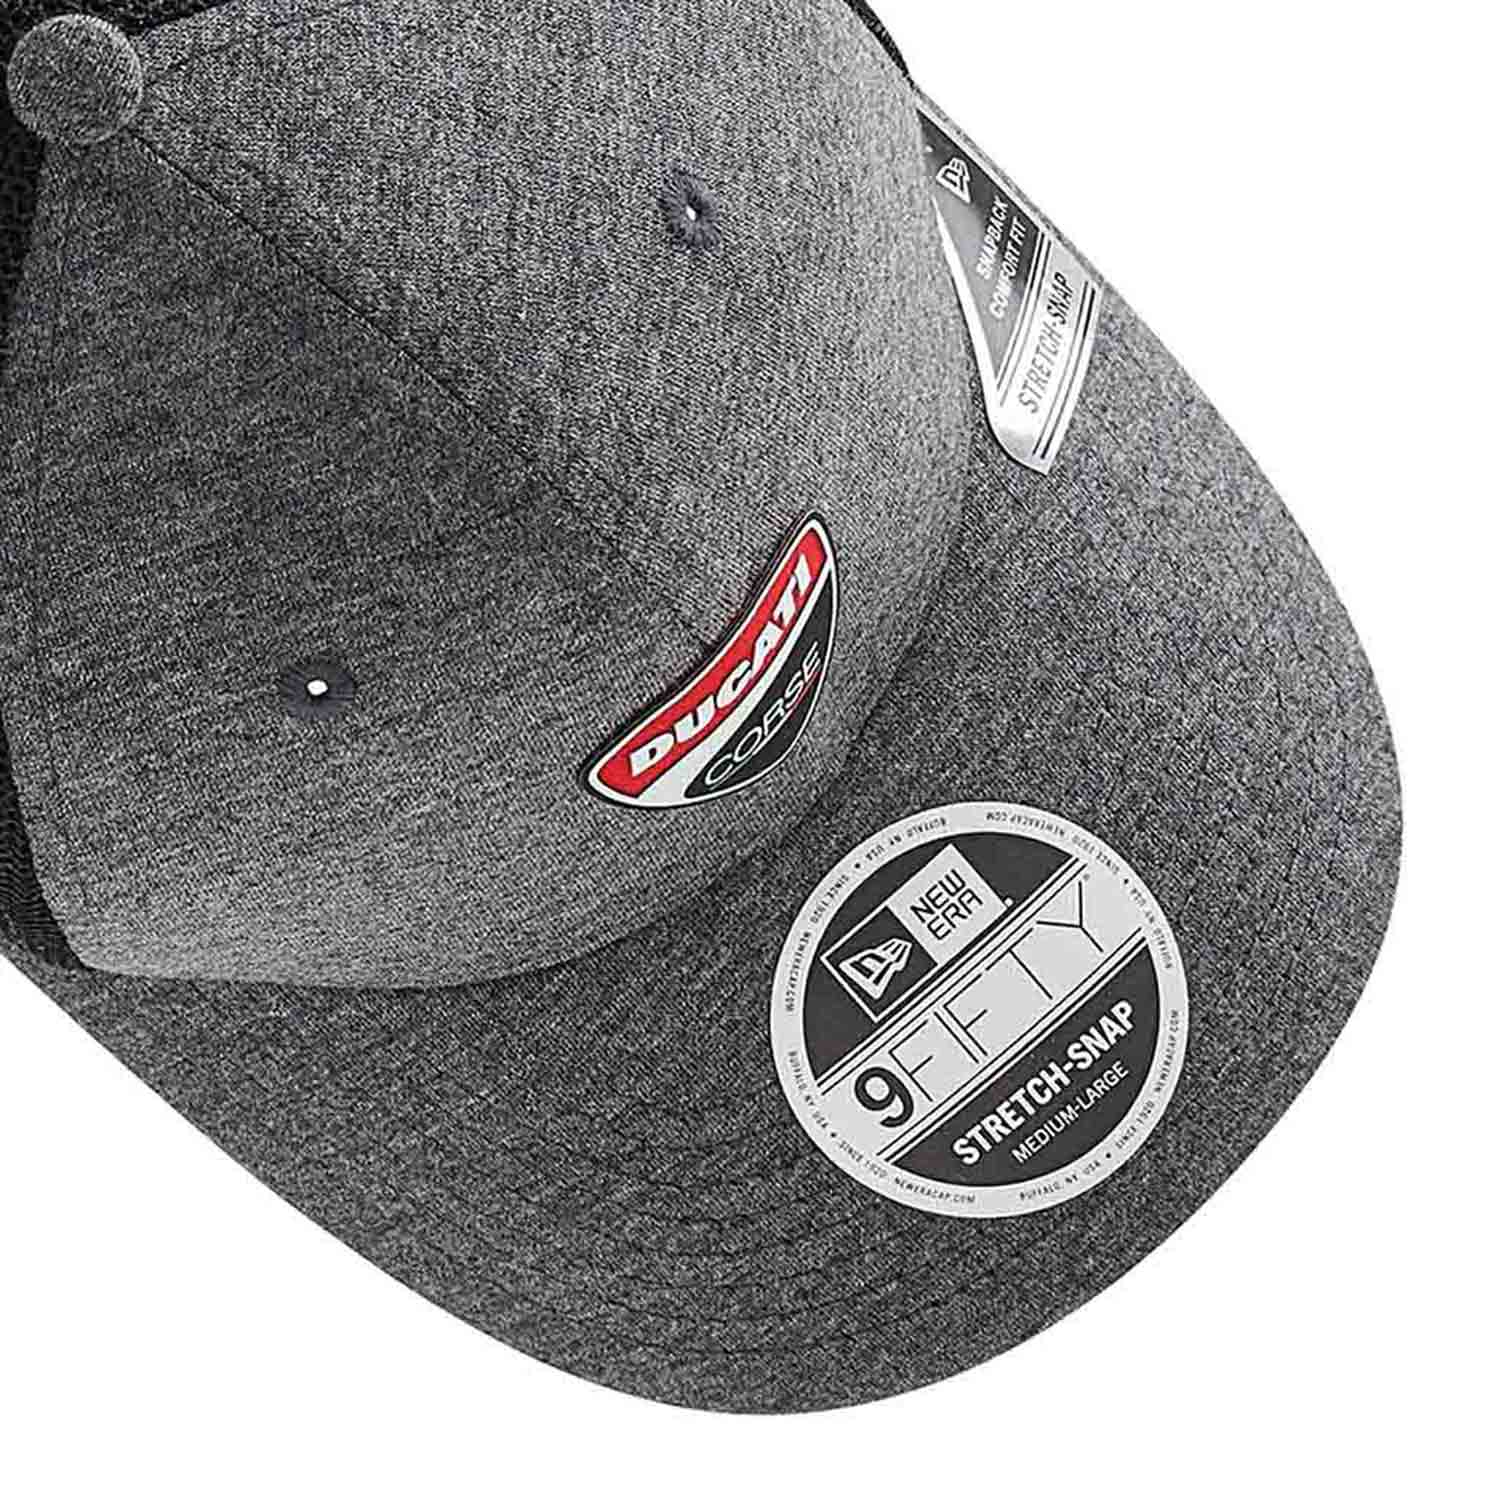 Ducati Corse Jersey Grey 9FIFTY Stretch Snap Cap – Fueler store